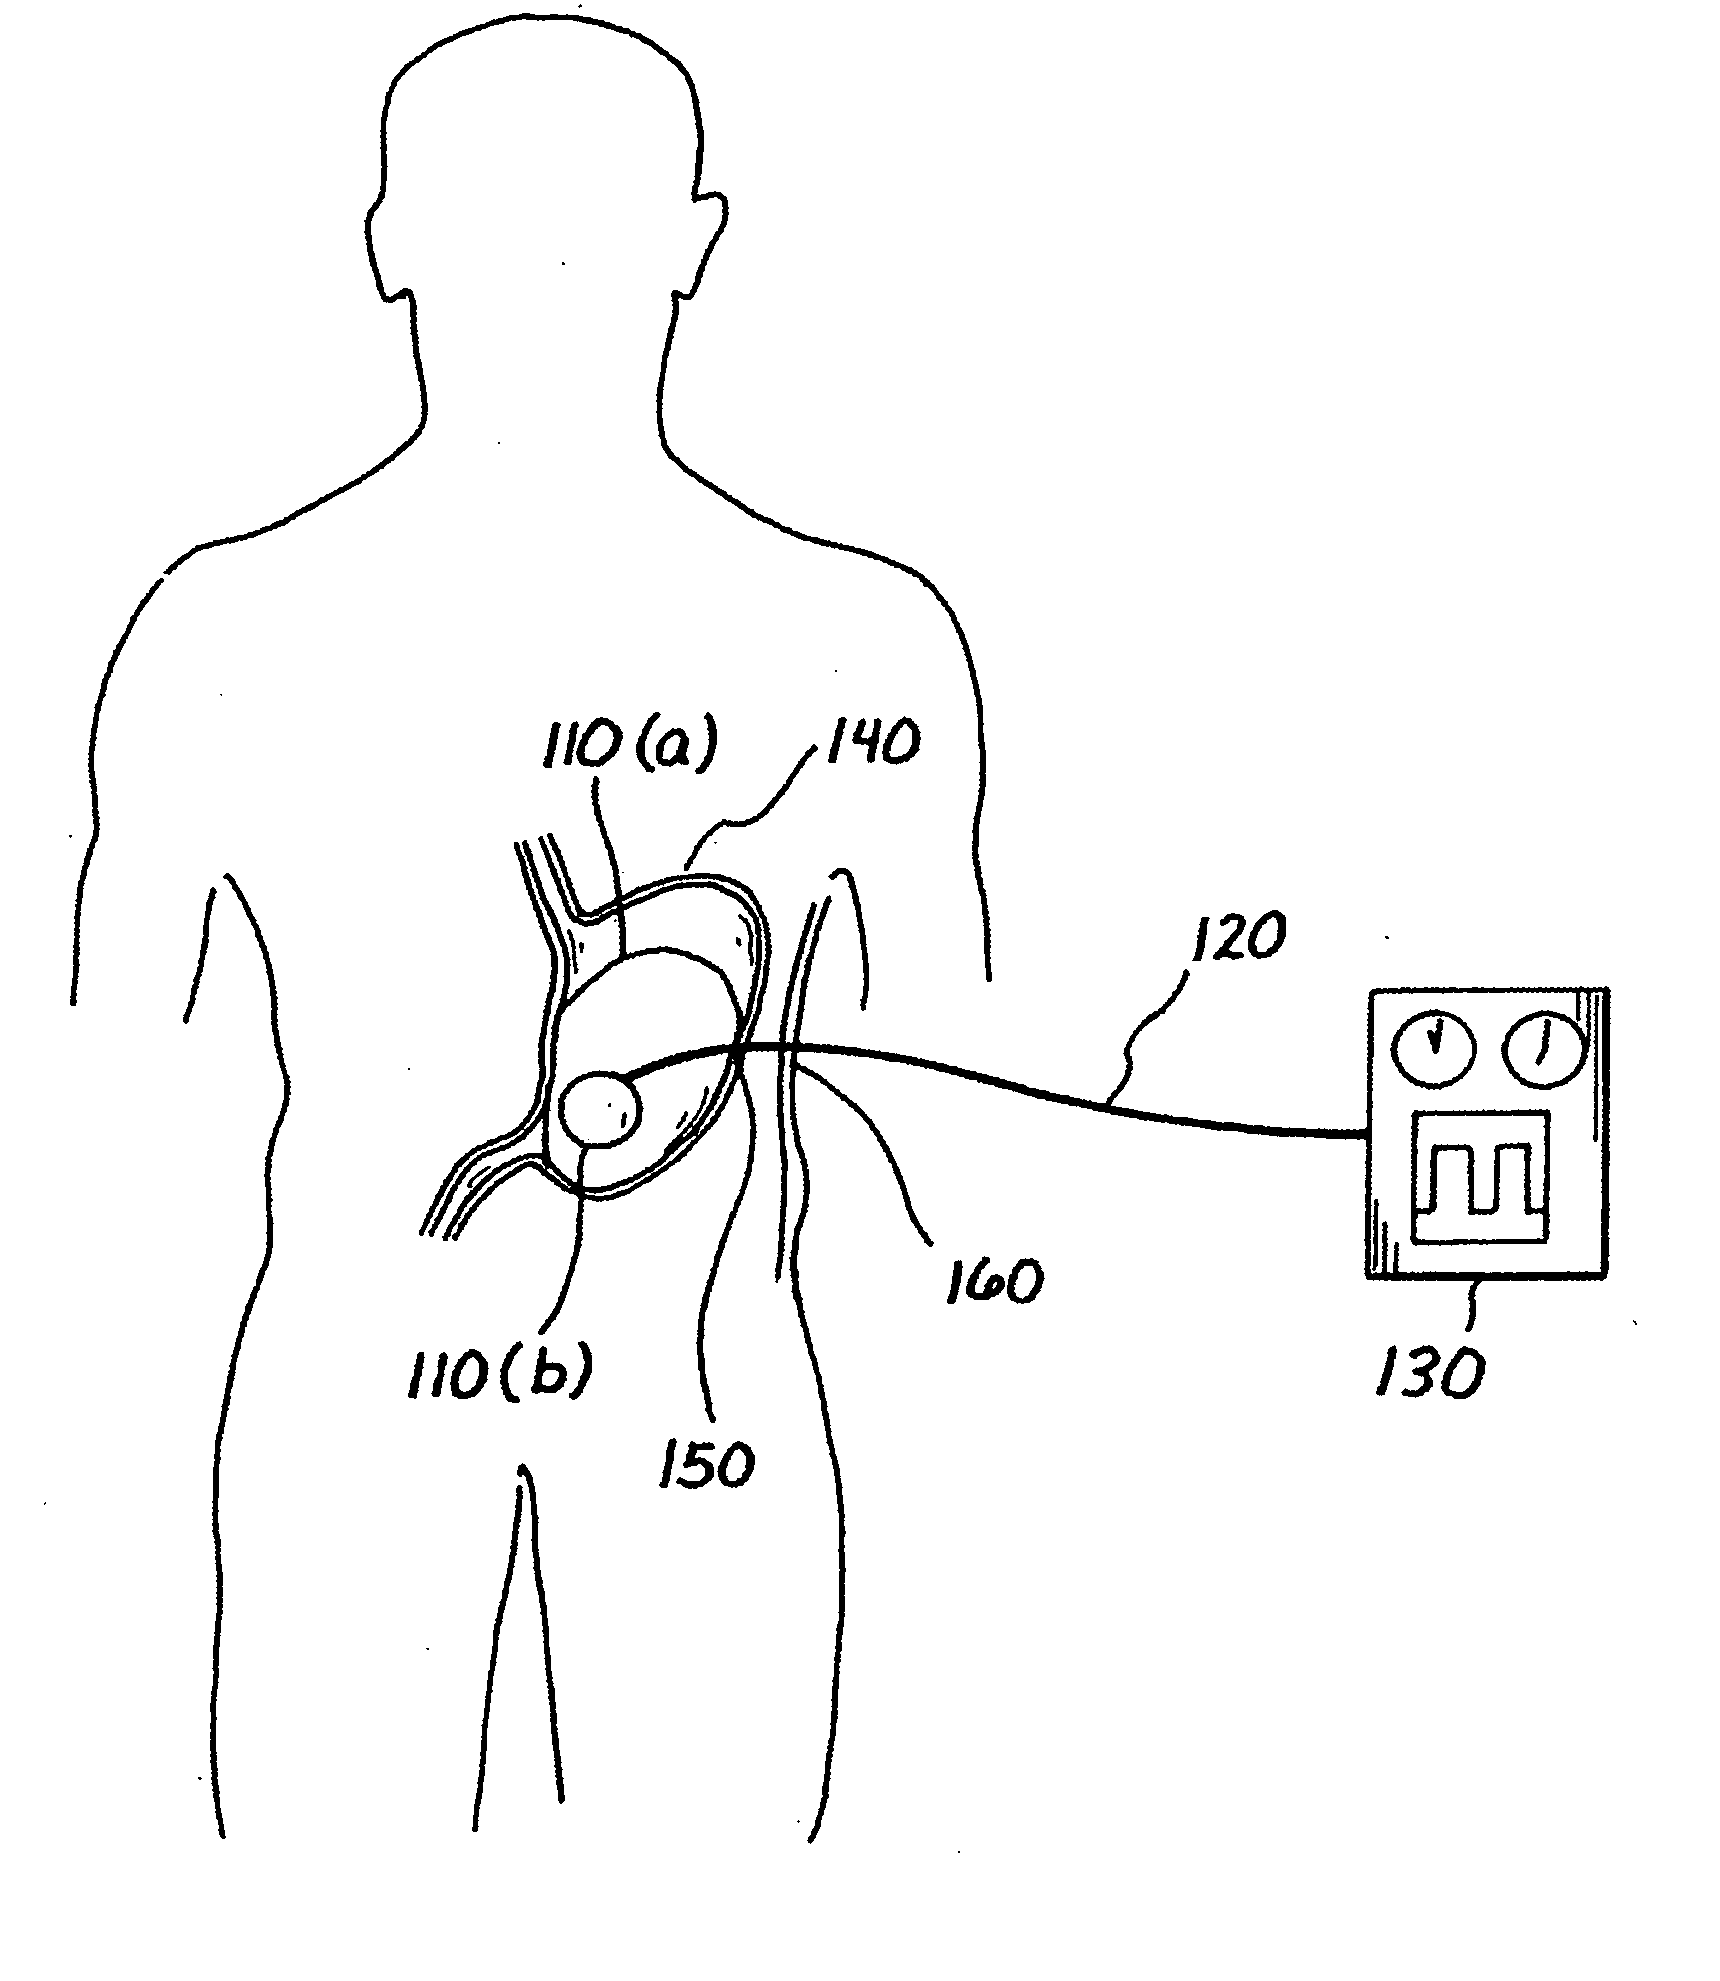 Balloon system and methods for treating obesity